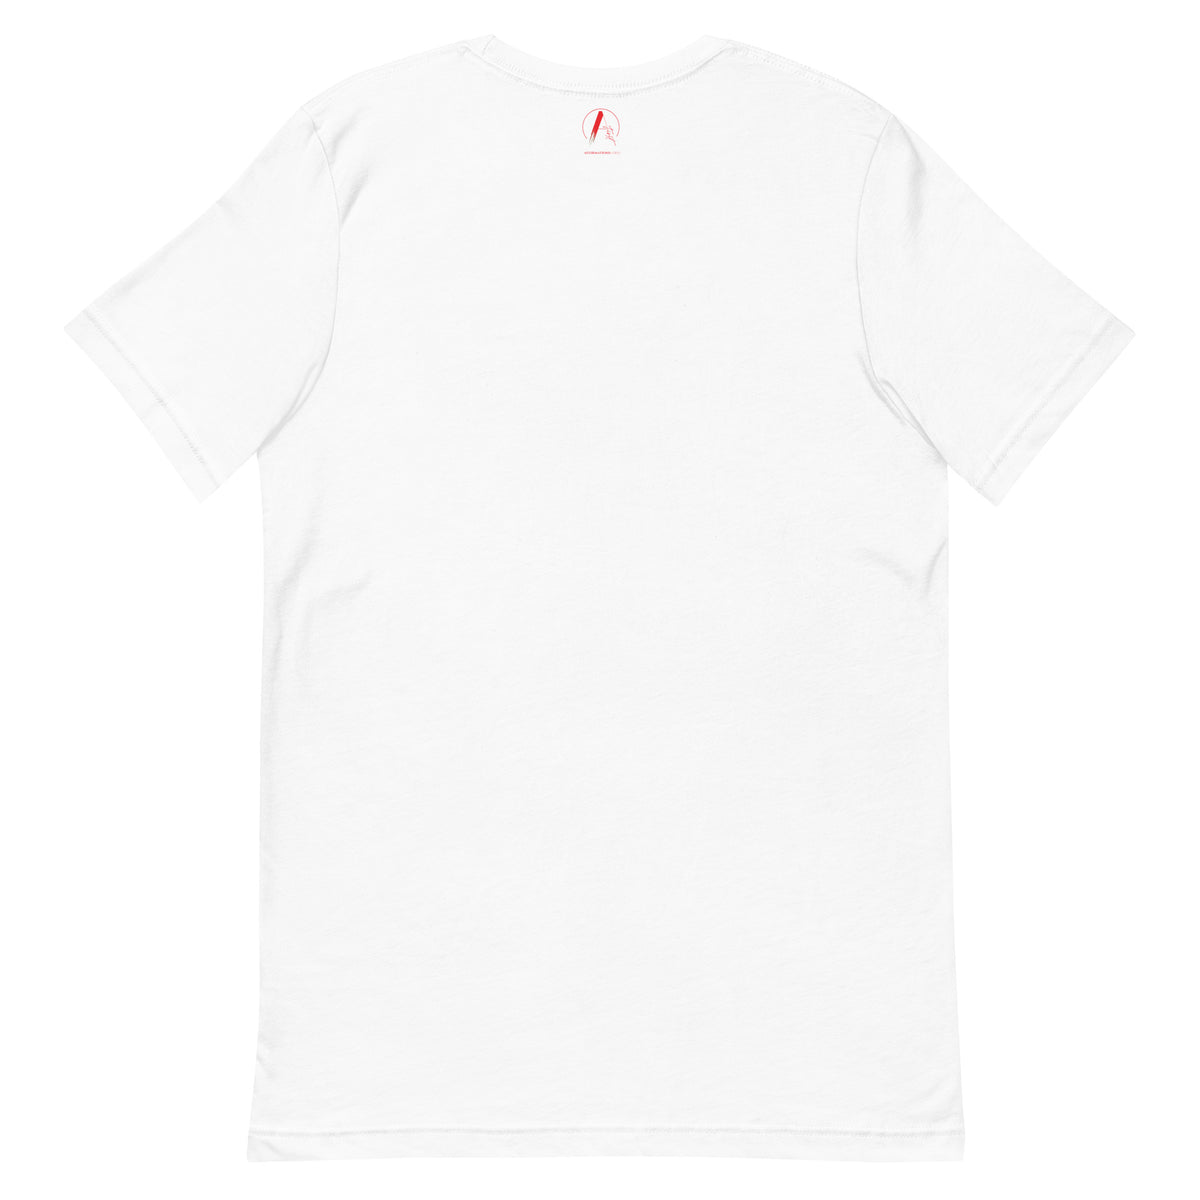 His "Affirmations First Limited Edition" T-Shirt - Red